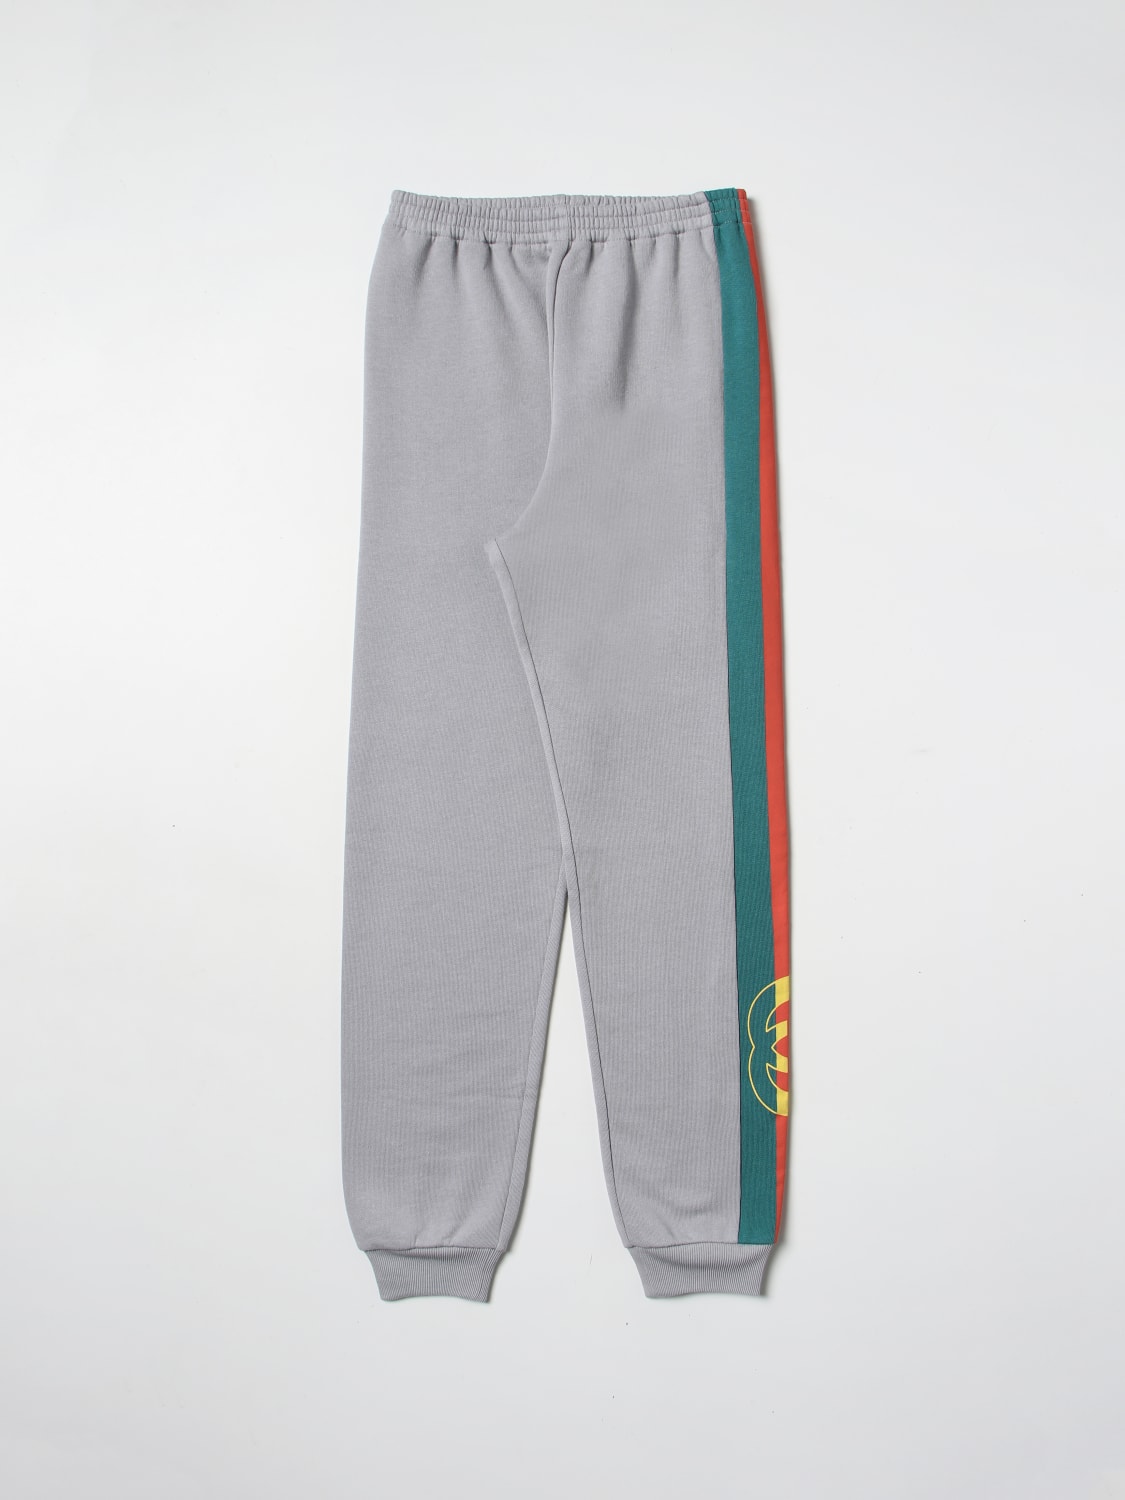 GUCCI: pants for Grey | Gucci pants online at GIGLIO.COM